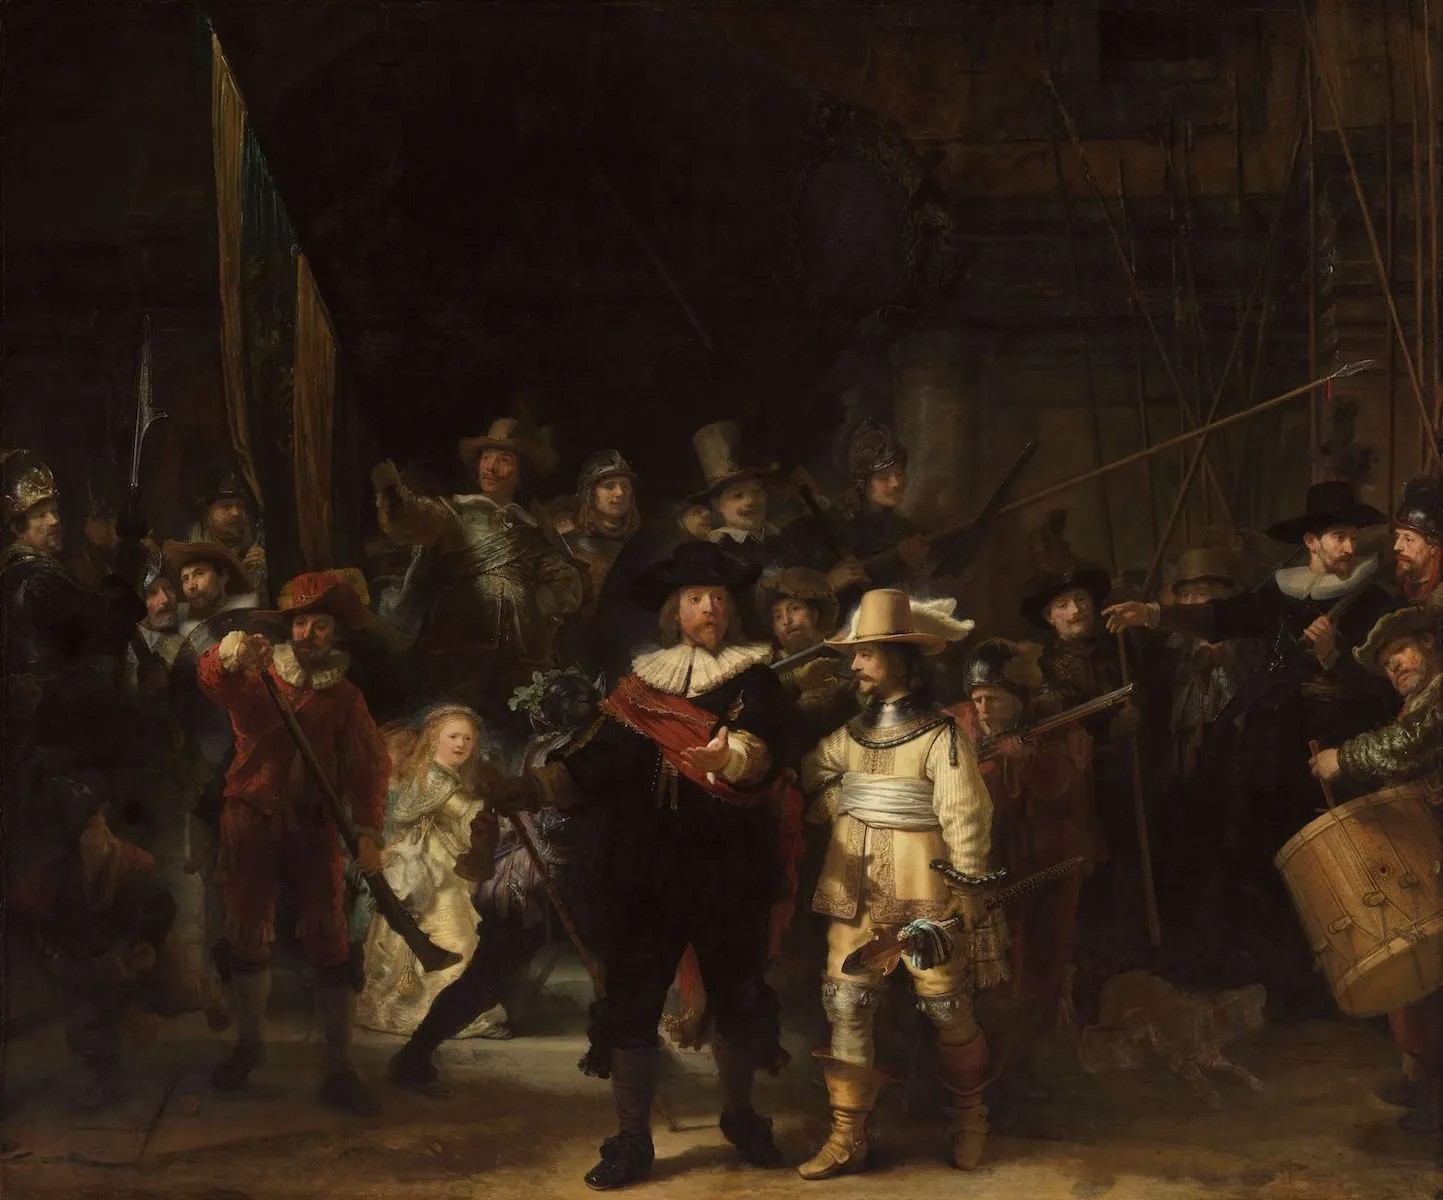 Previously Unseen Painting Technique Was Used by Rembrandt in ‘The Night Watch,’ New Study Reveals